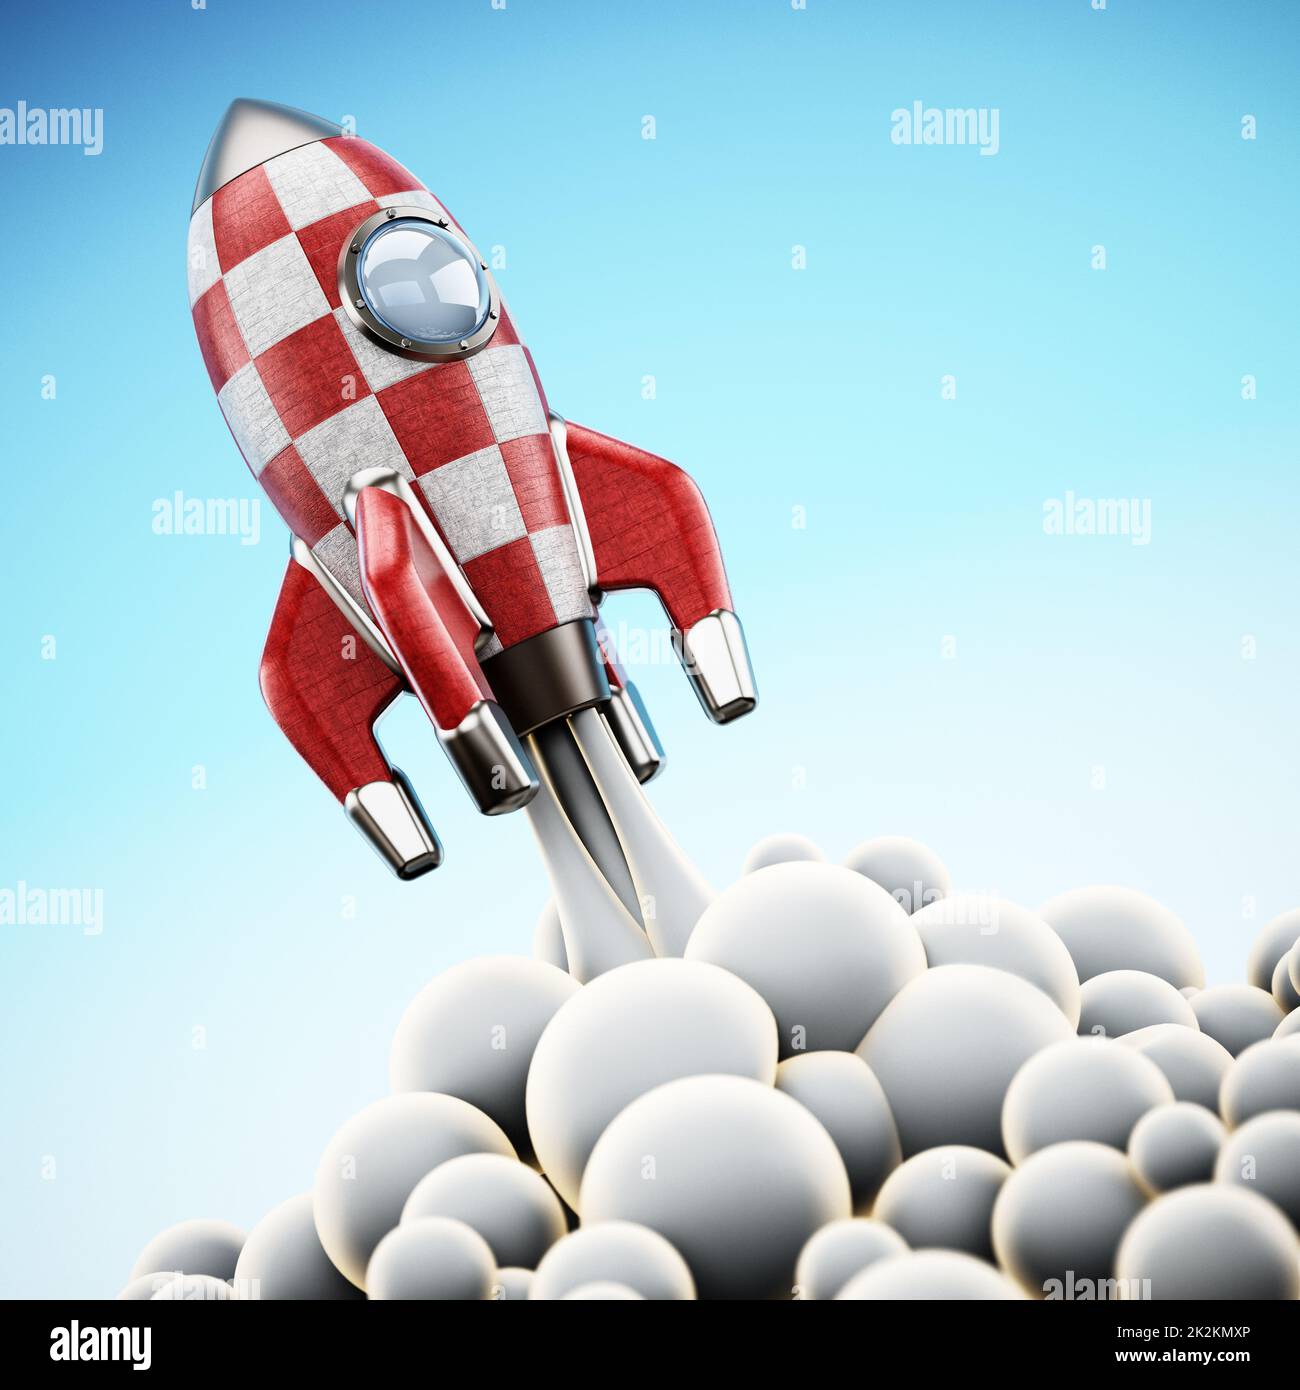 Vintage rocket ship launching to space. 3D illustration Stock Photo